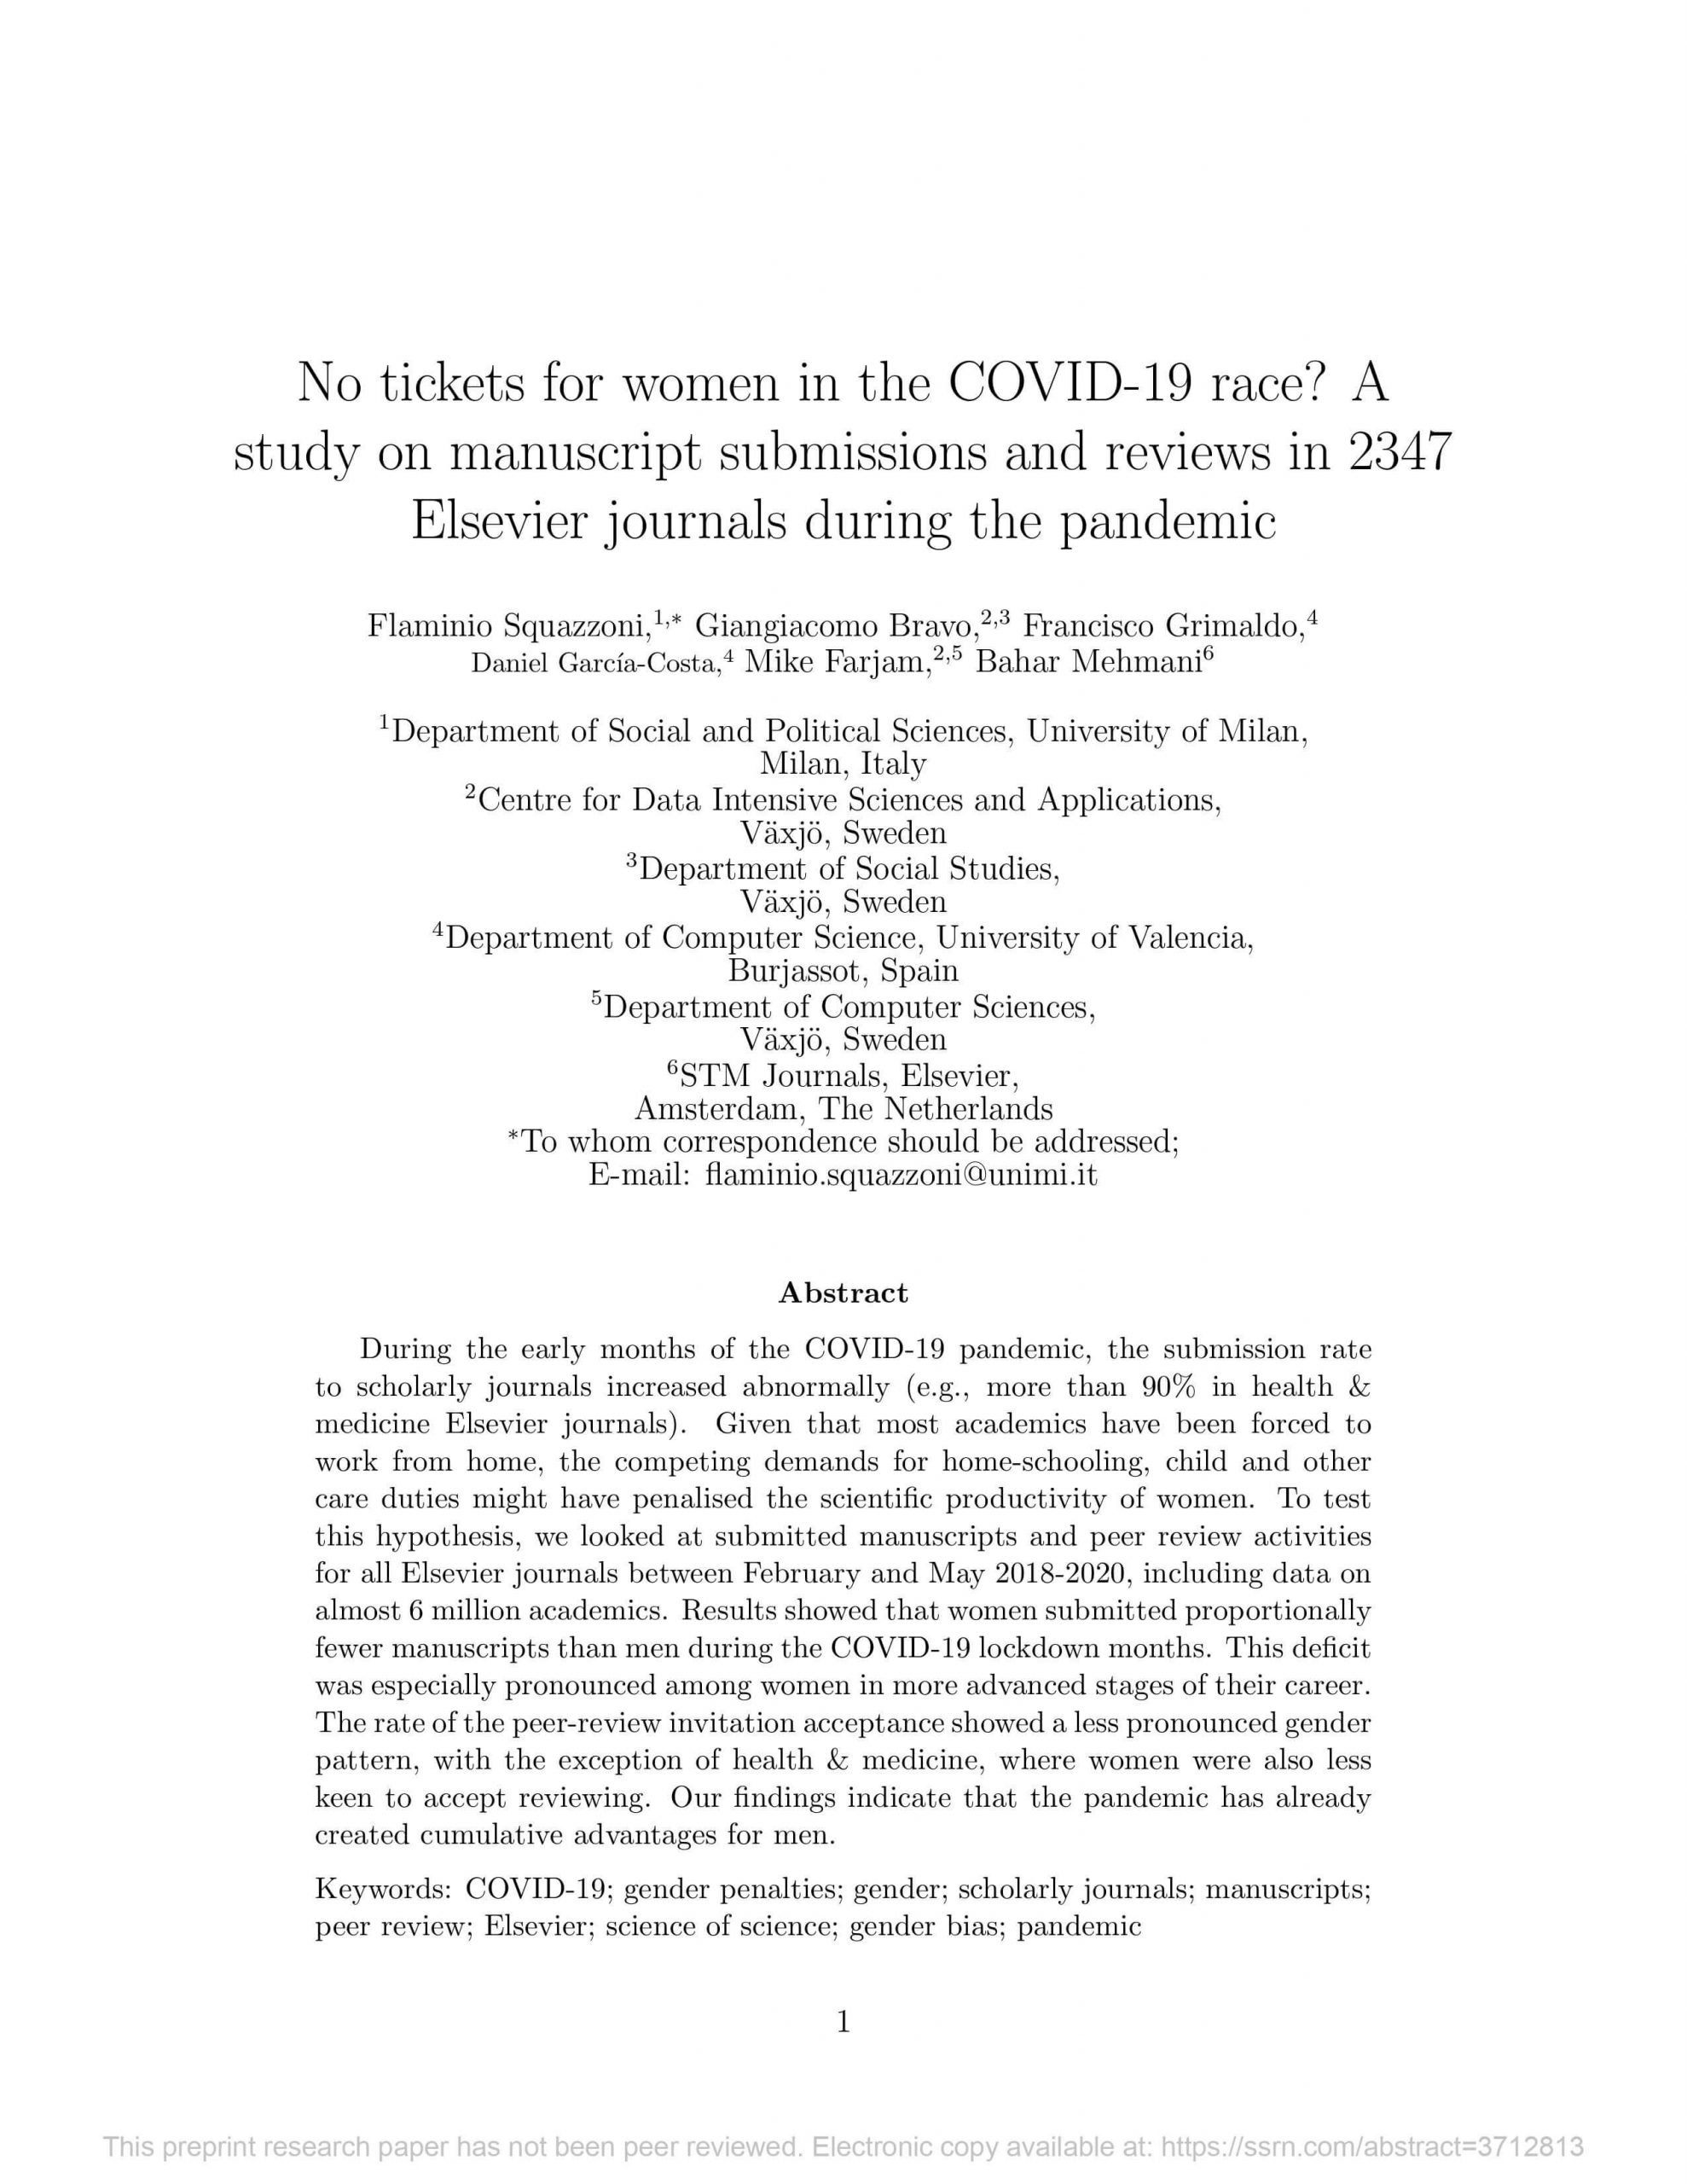 No Tickets for Women in the COVID-19 Race? A Study on Manuscript Submissions and Reviews in 2347 Elsevier Journals during the Pandemic